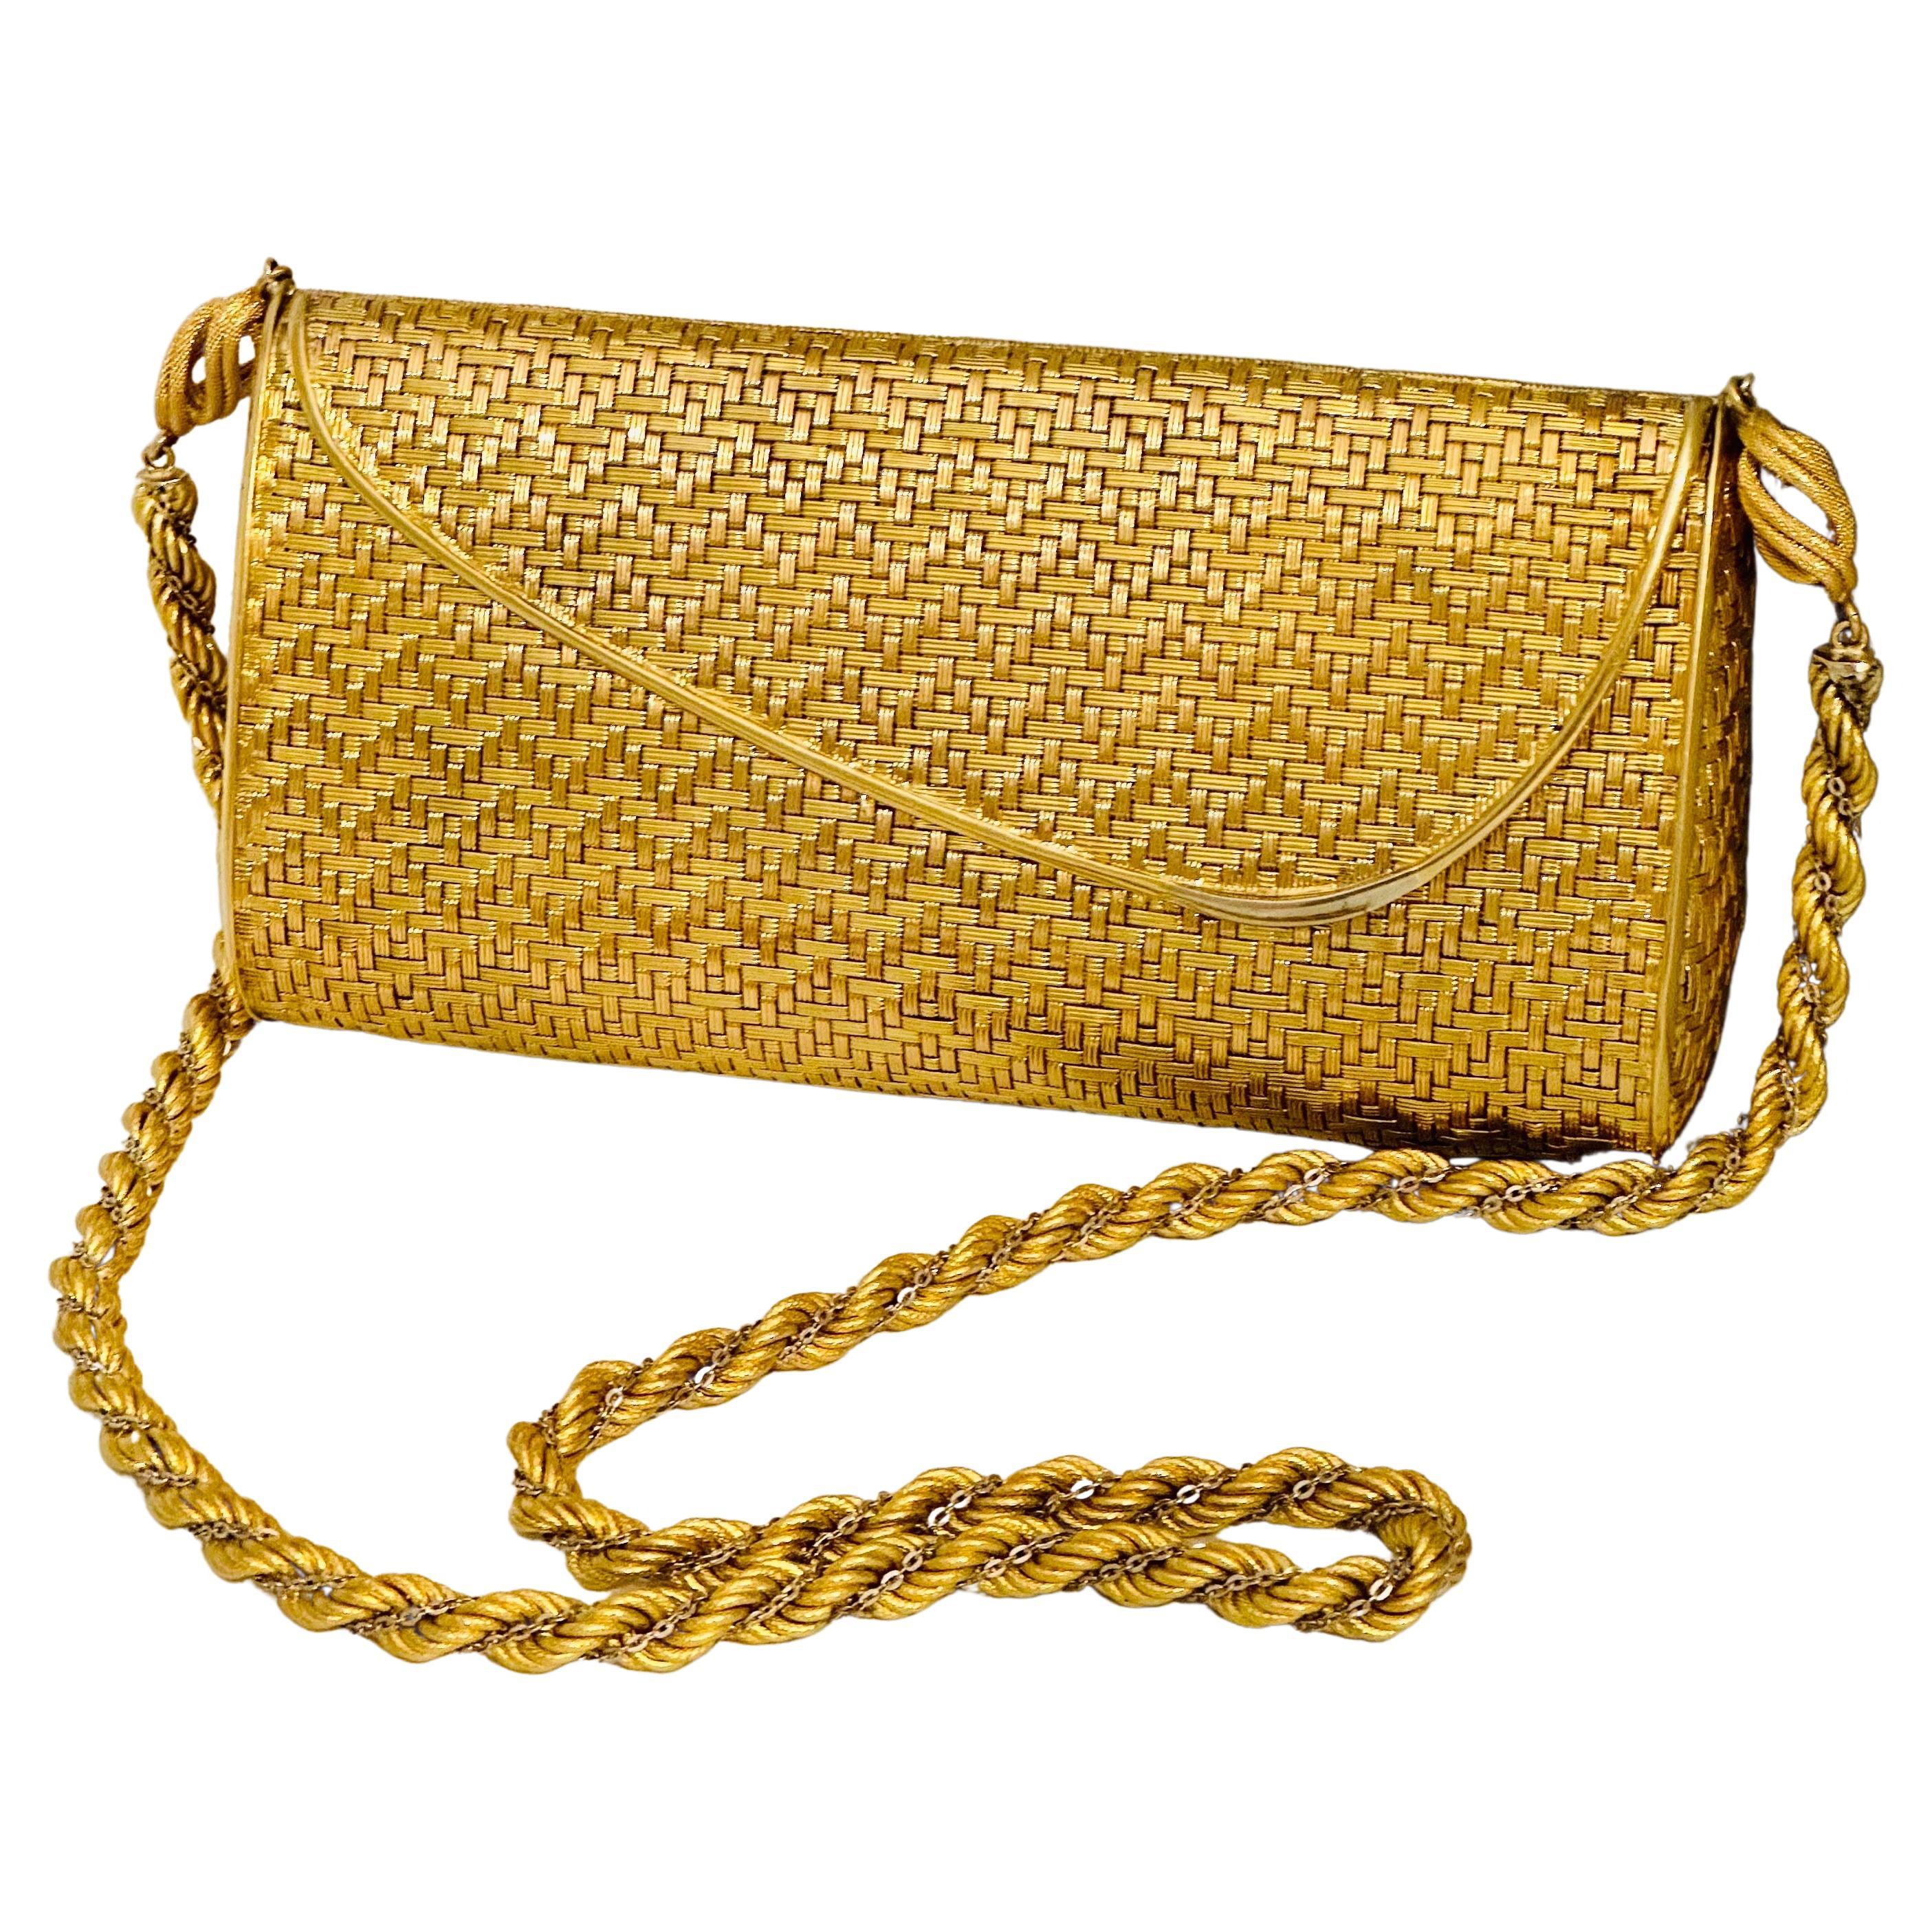 Cartier 18k Yellow Gold Mesh Purse Handbag with Shoulder Chain Rare 401 Gm For Sale